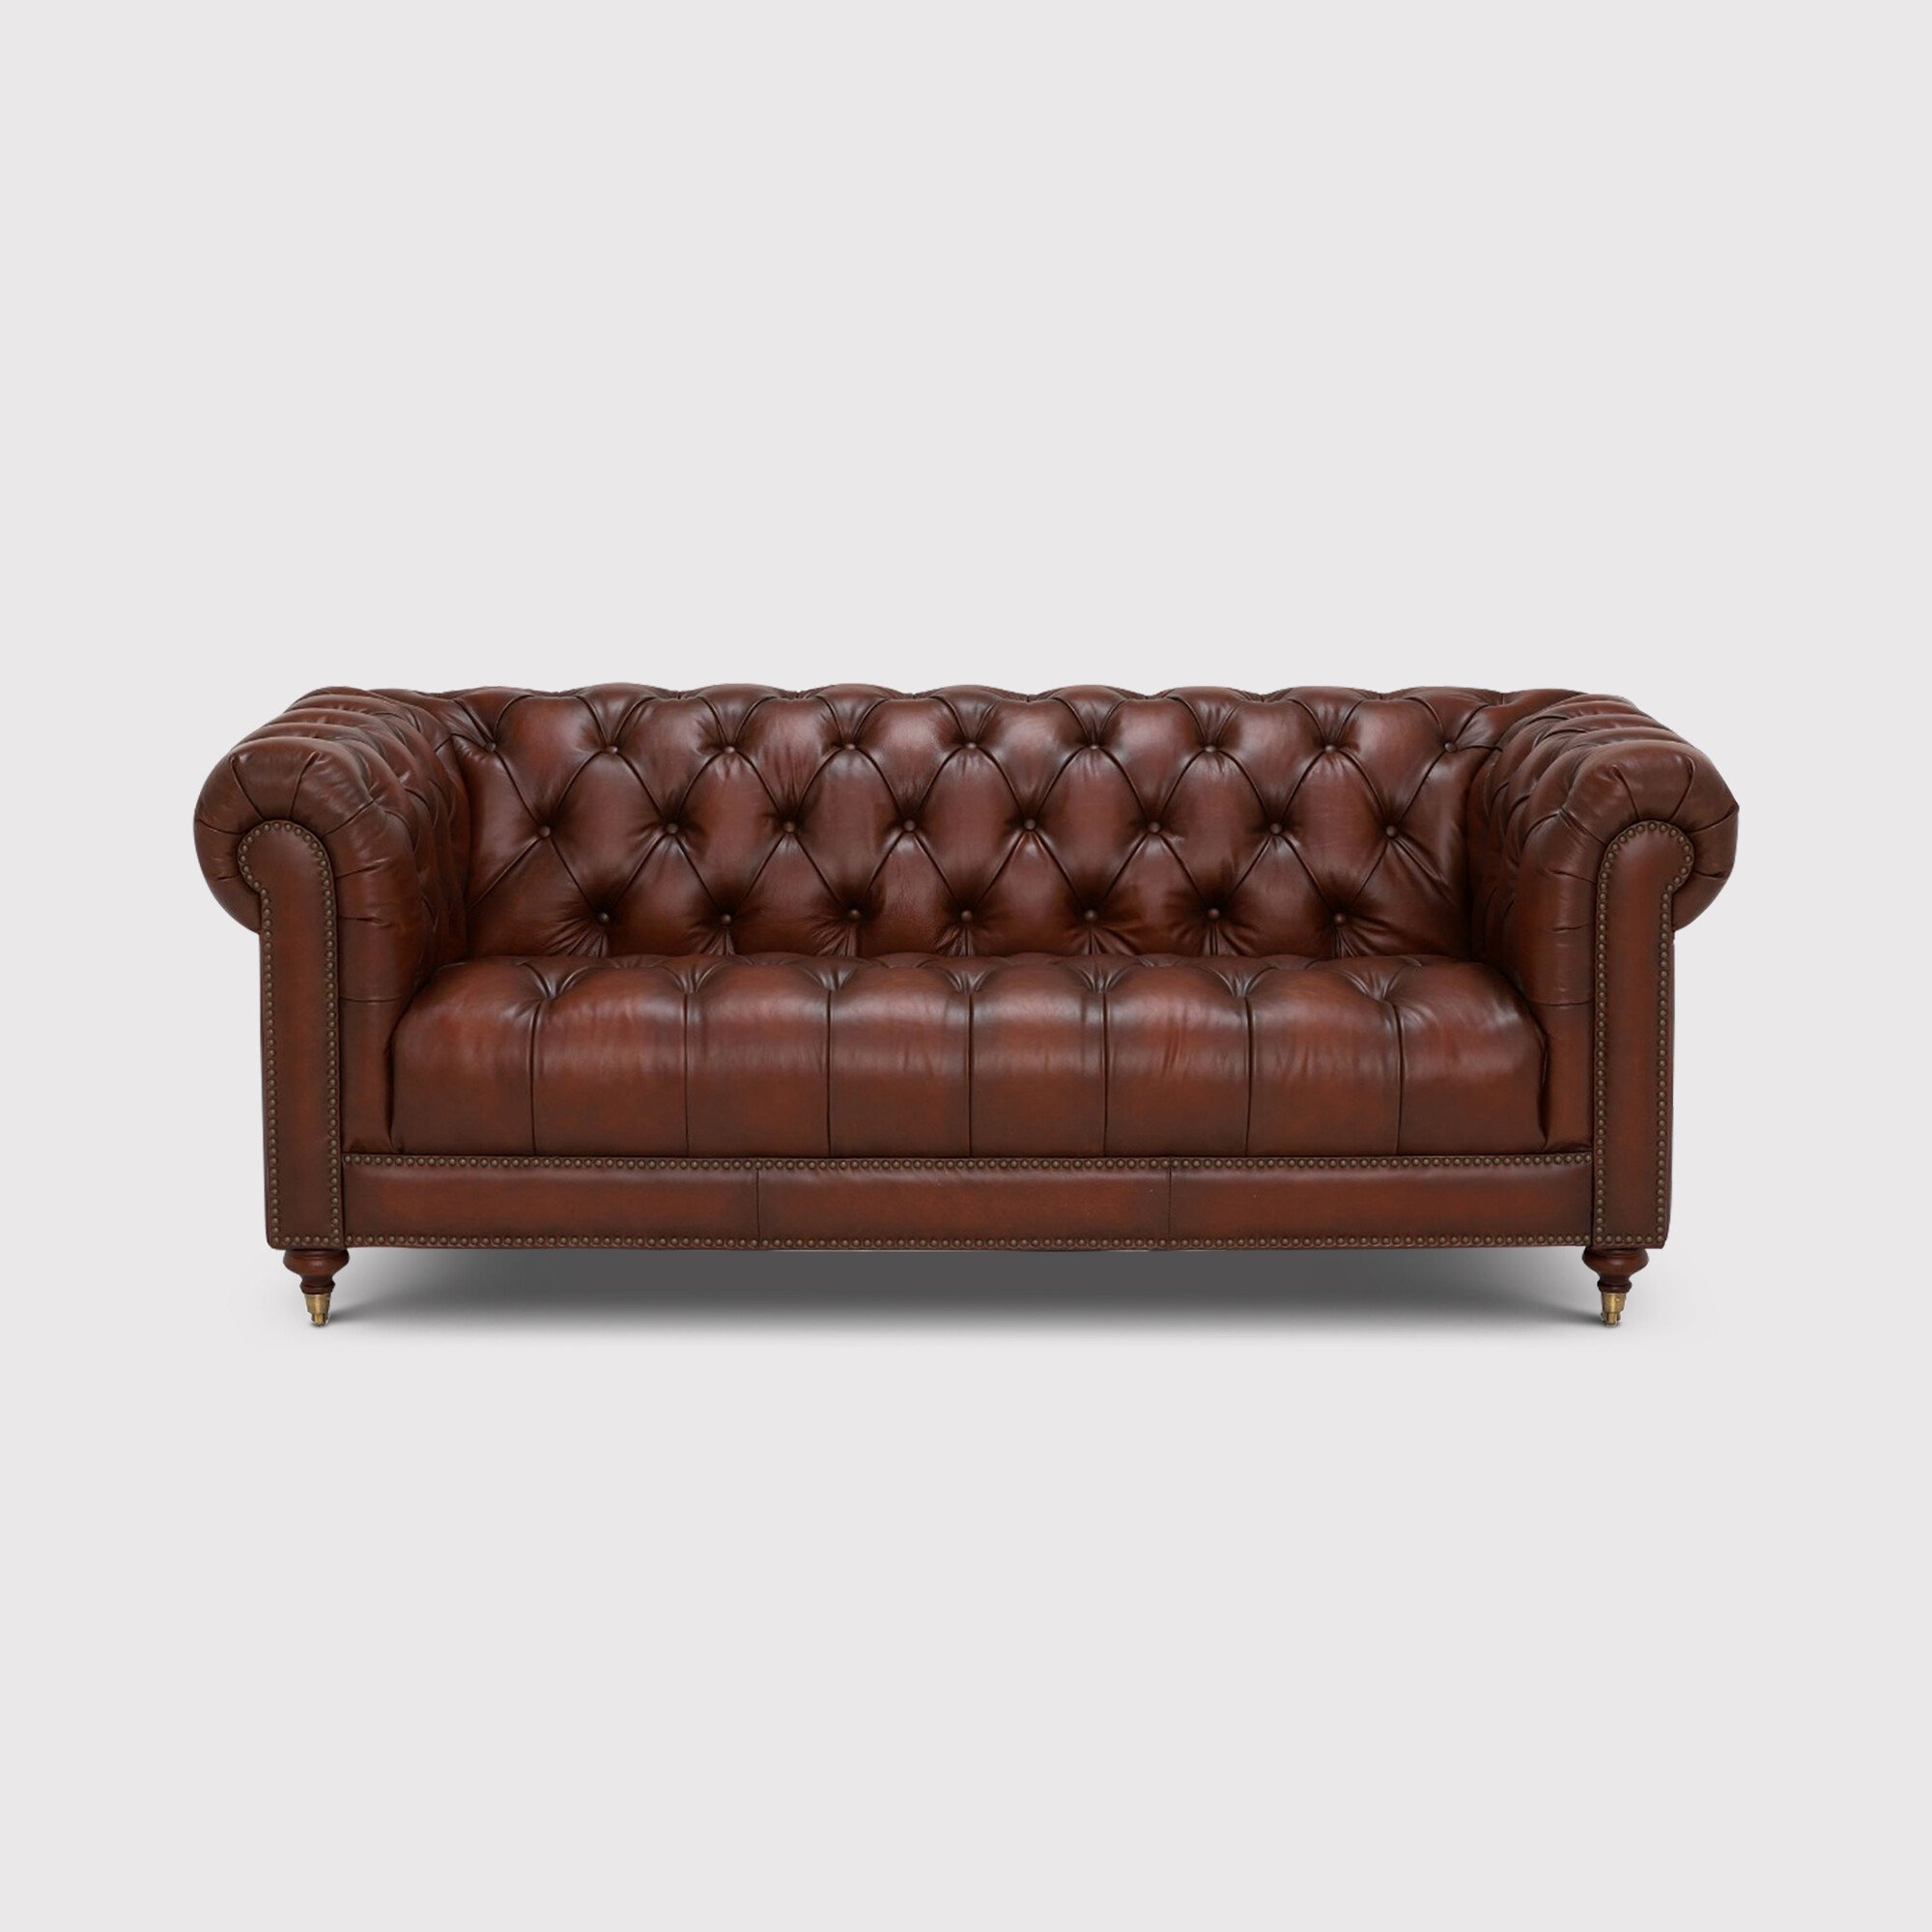 Ullswater 3 Seater Leather Chesterfield Sofa, Brown | Barker & Stonehouse